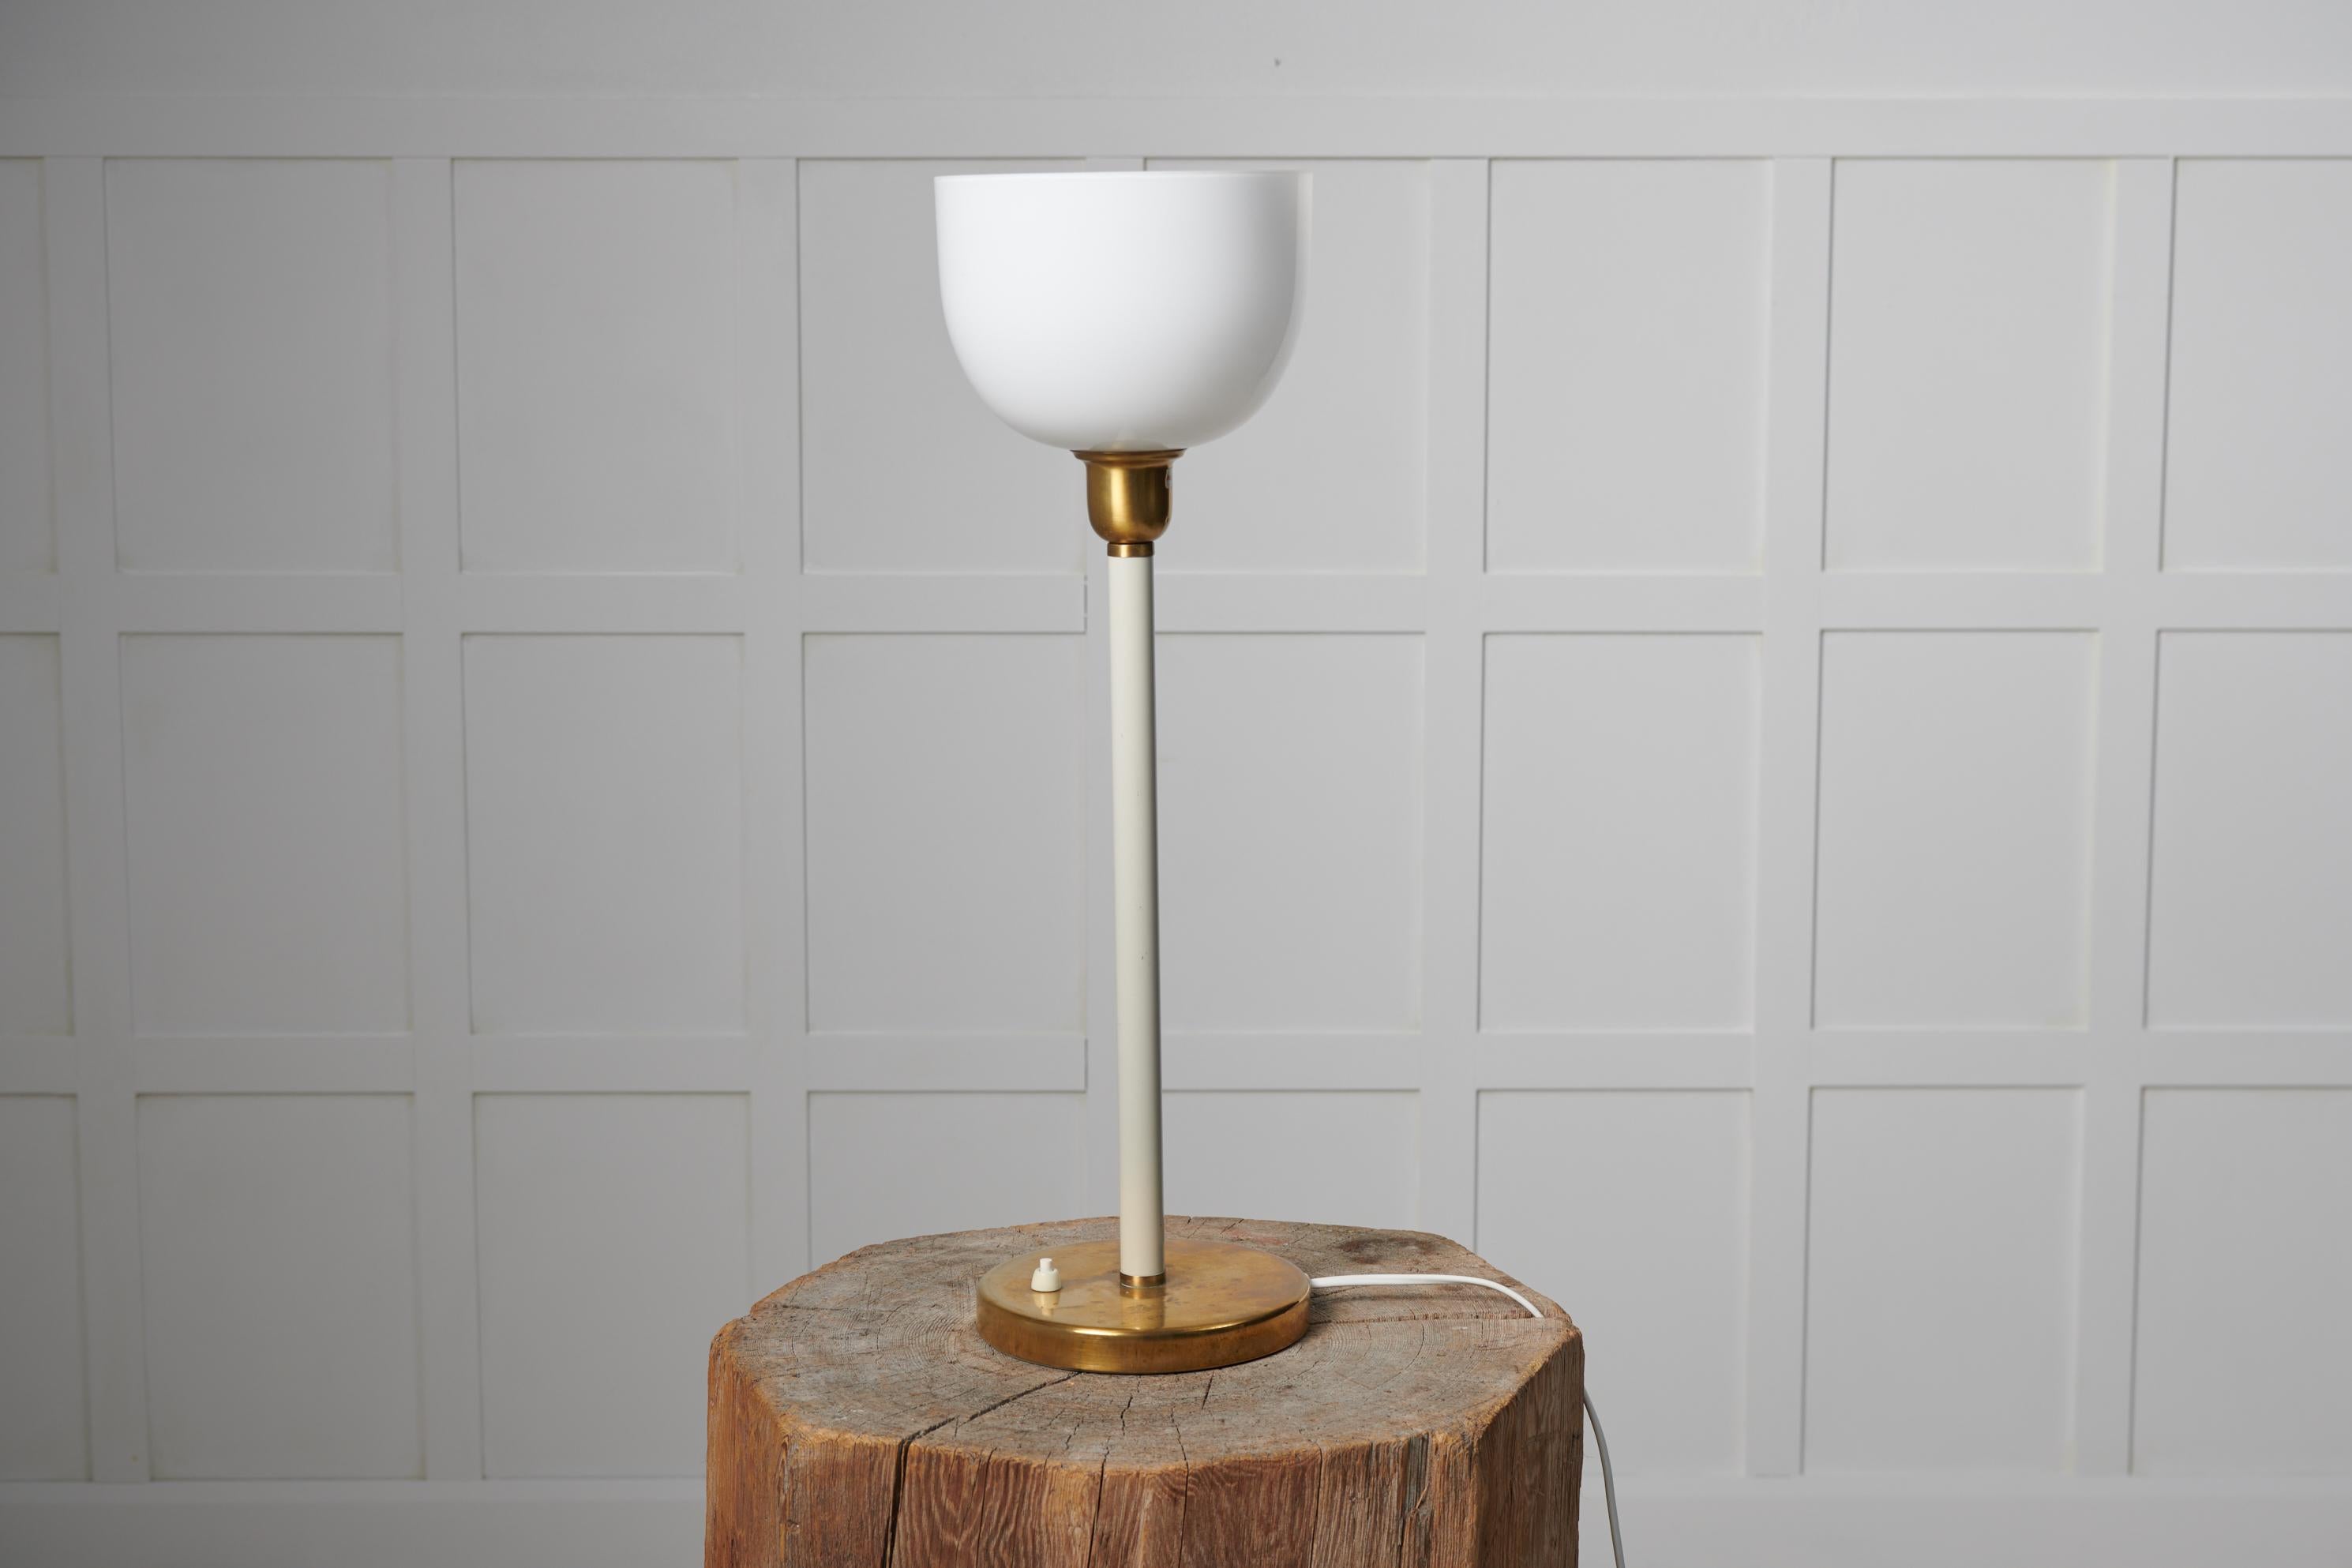 Swedish modern table light from the 1930s to 1940s. The light is likely by Böhlmarks. It has a foot in brass and a white stem. The shade to the light is original and made in white opaline glass. The electrics are new and made according to the EU